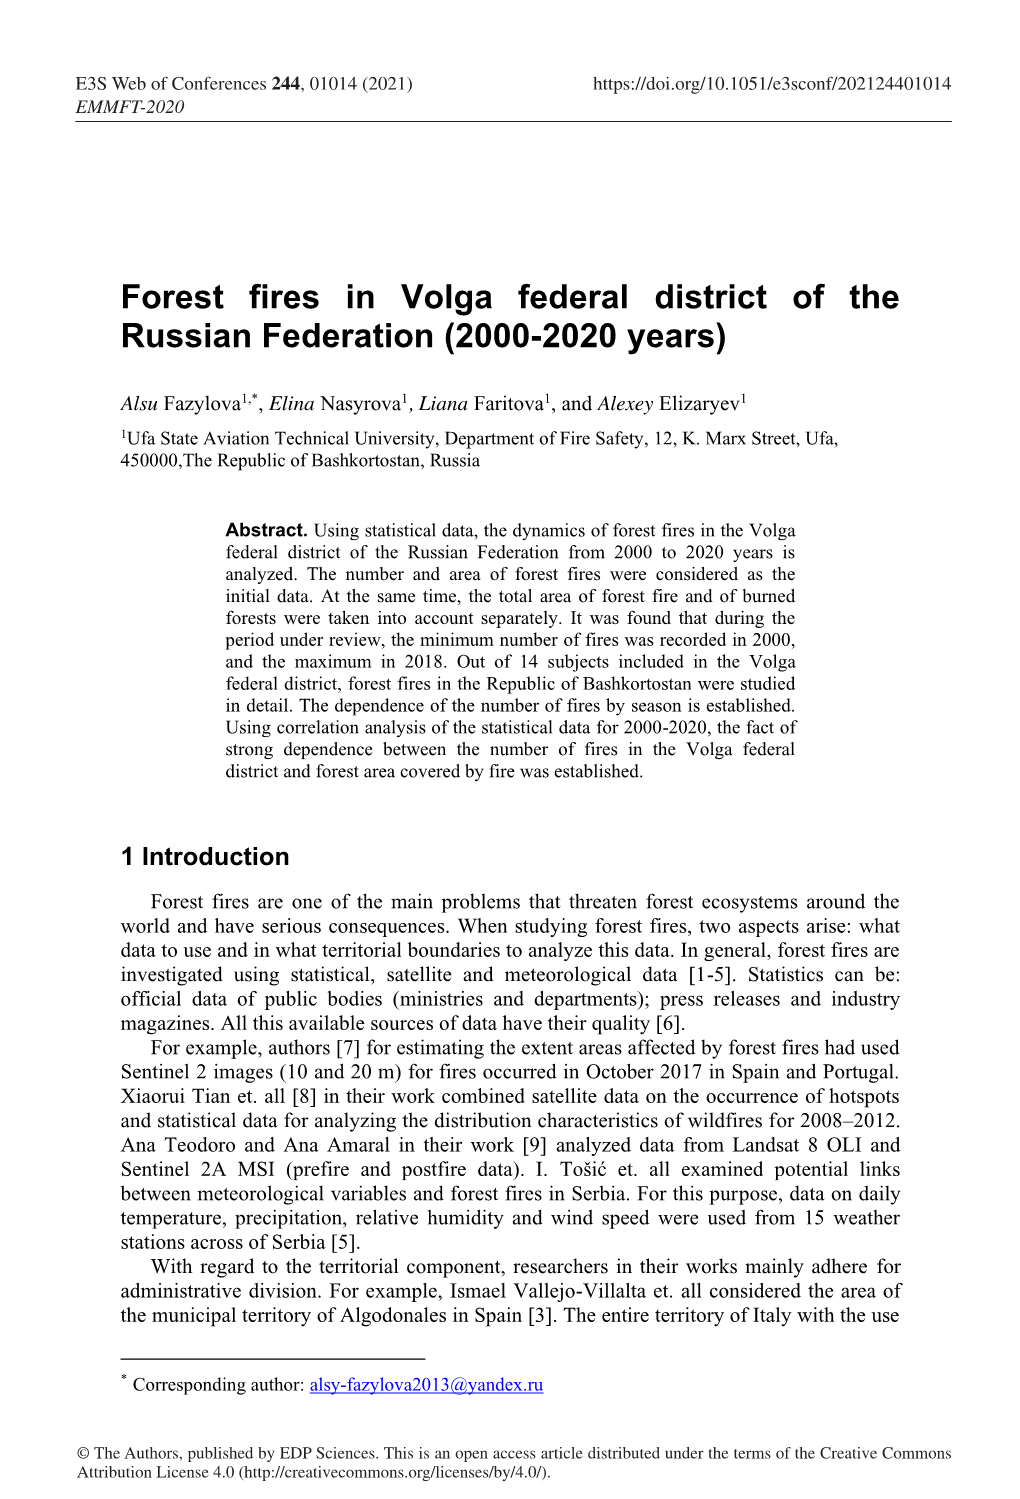 Forest Fires in Volga Federal District of the Russian Federation (2000-2020 Years)